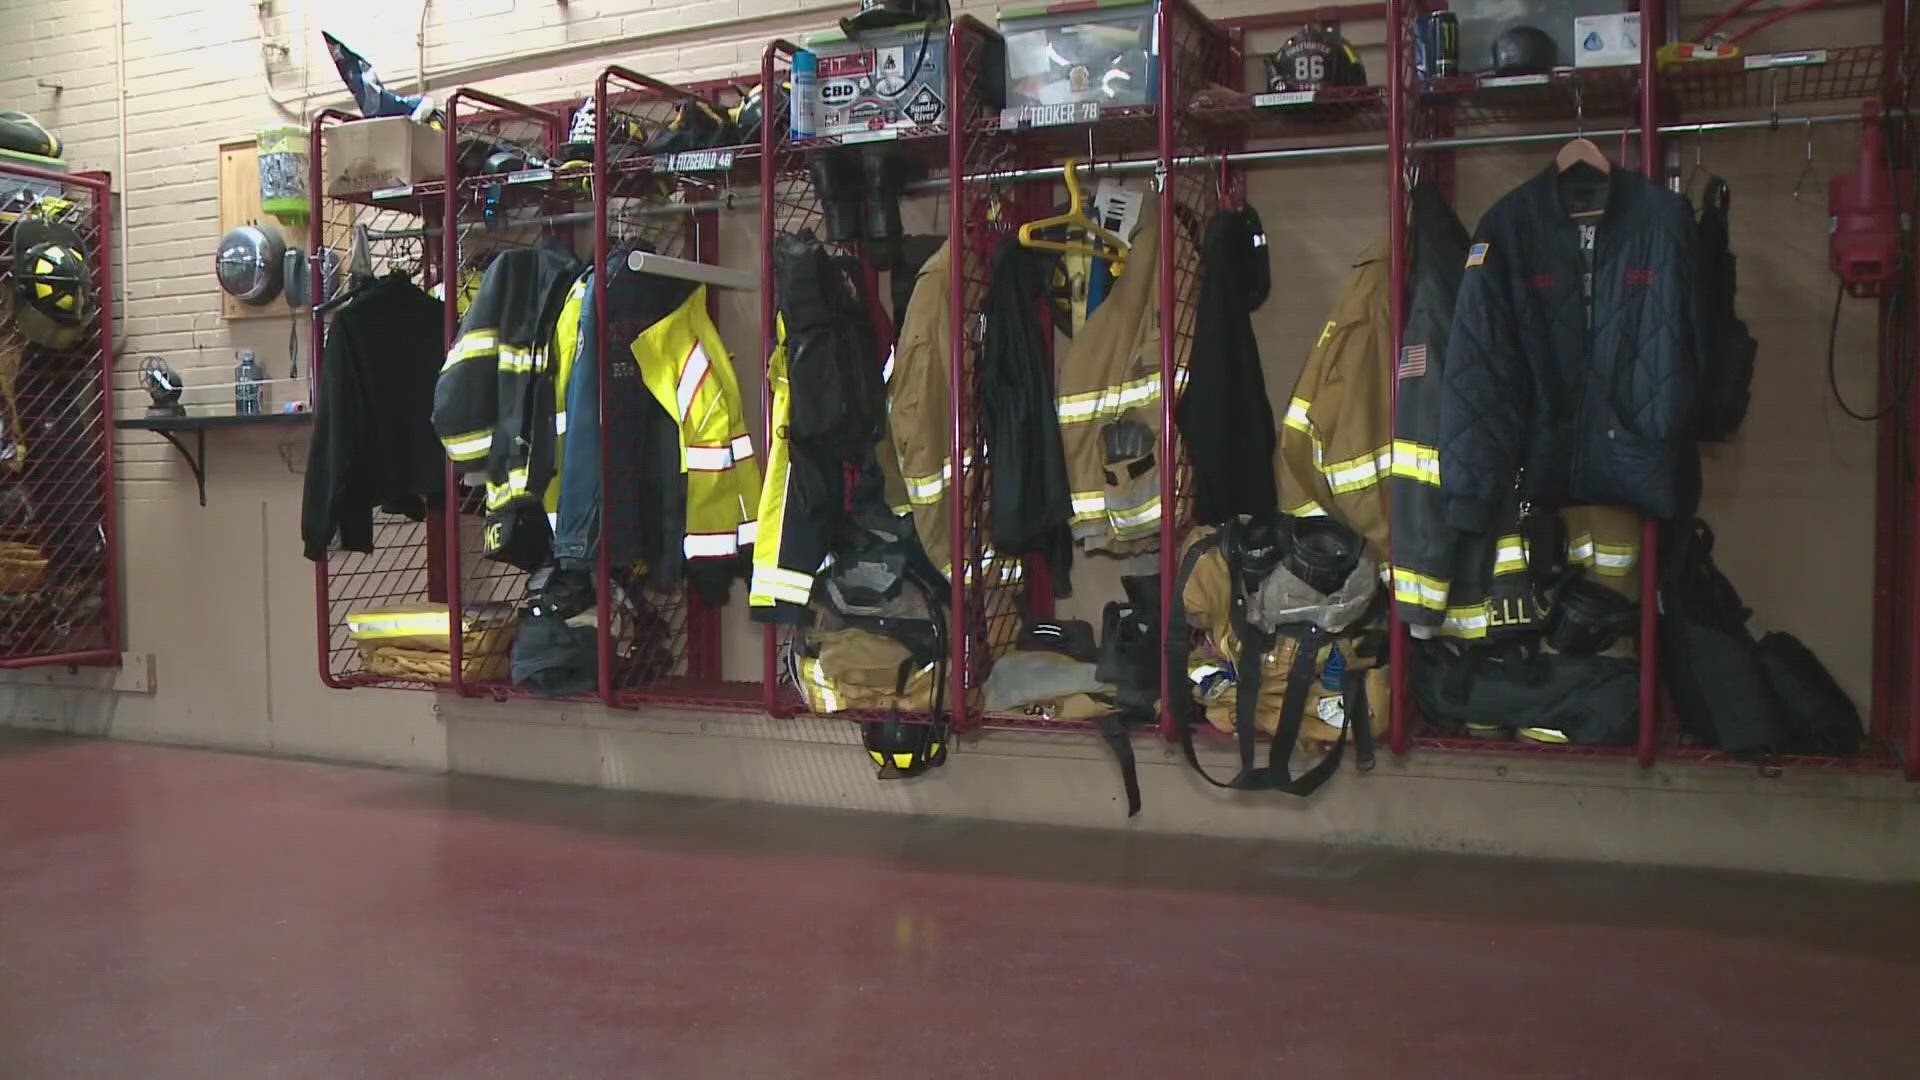 The International Association of Fire Fighters has launched a legal effort to end the use of toxic chemicals in turnout gear.